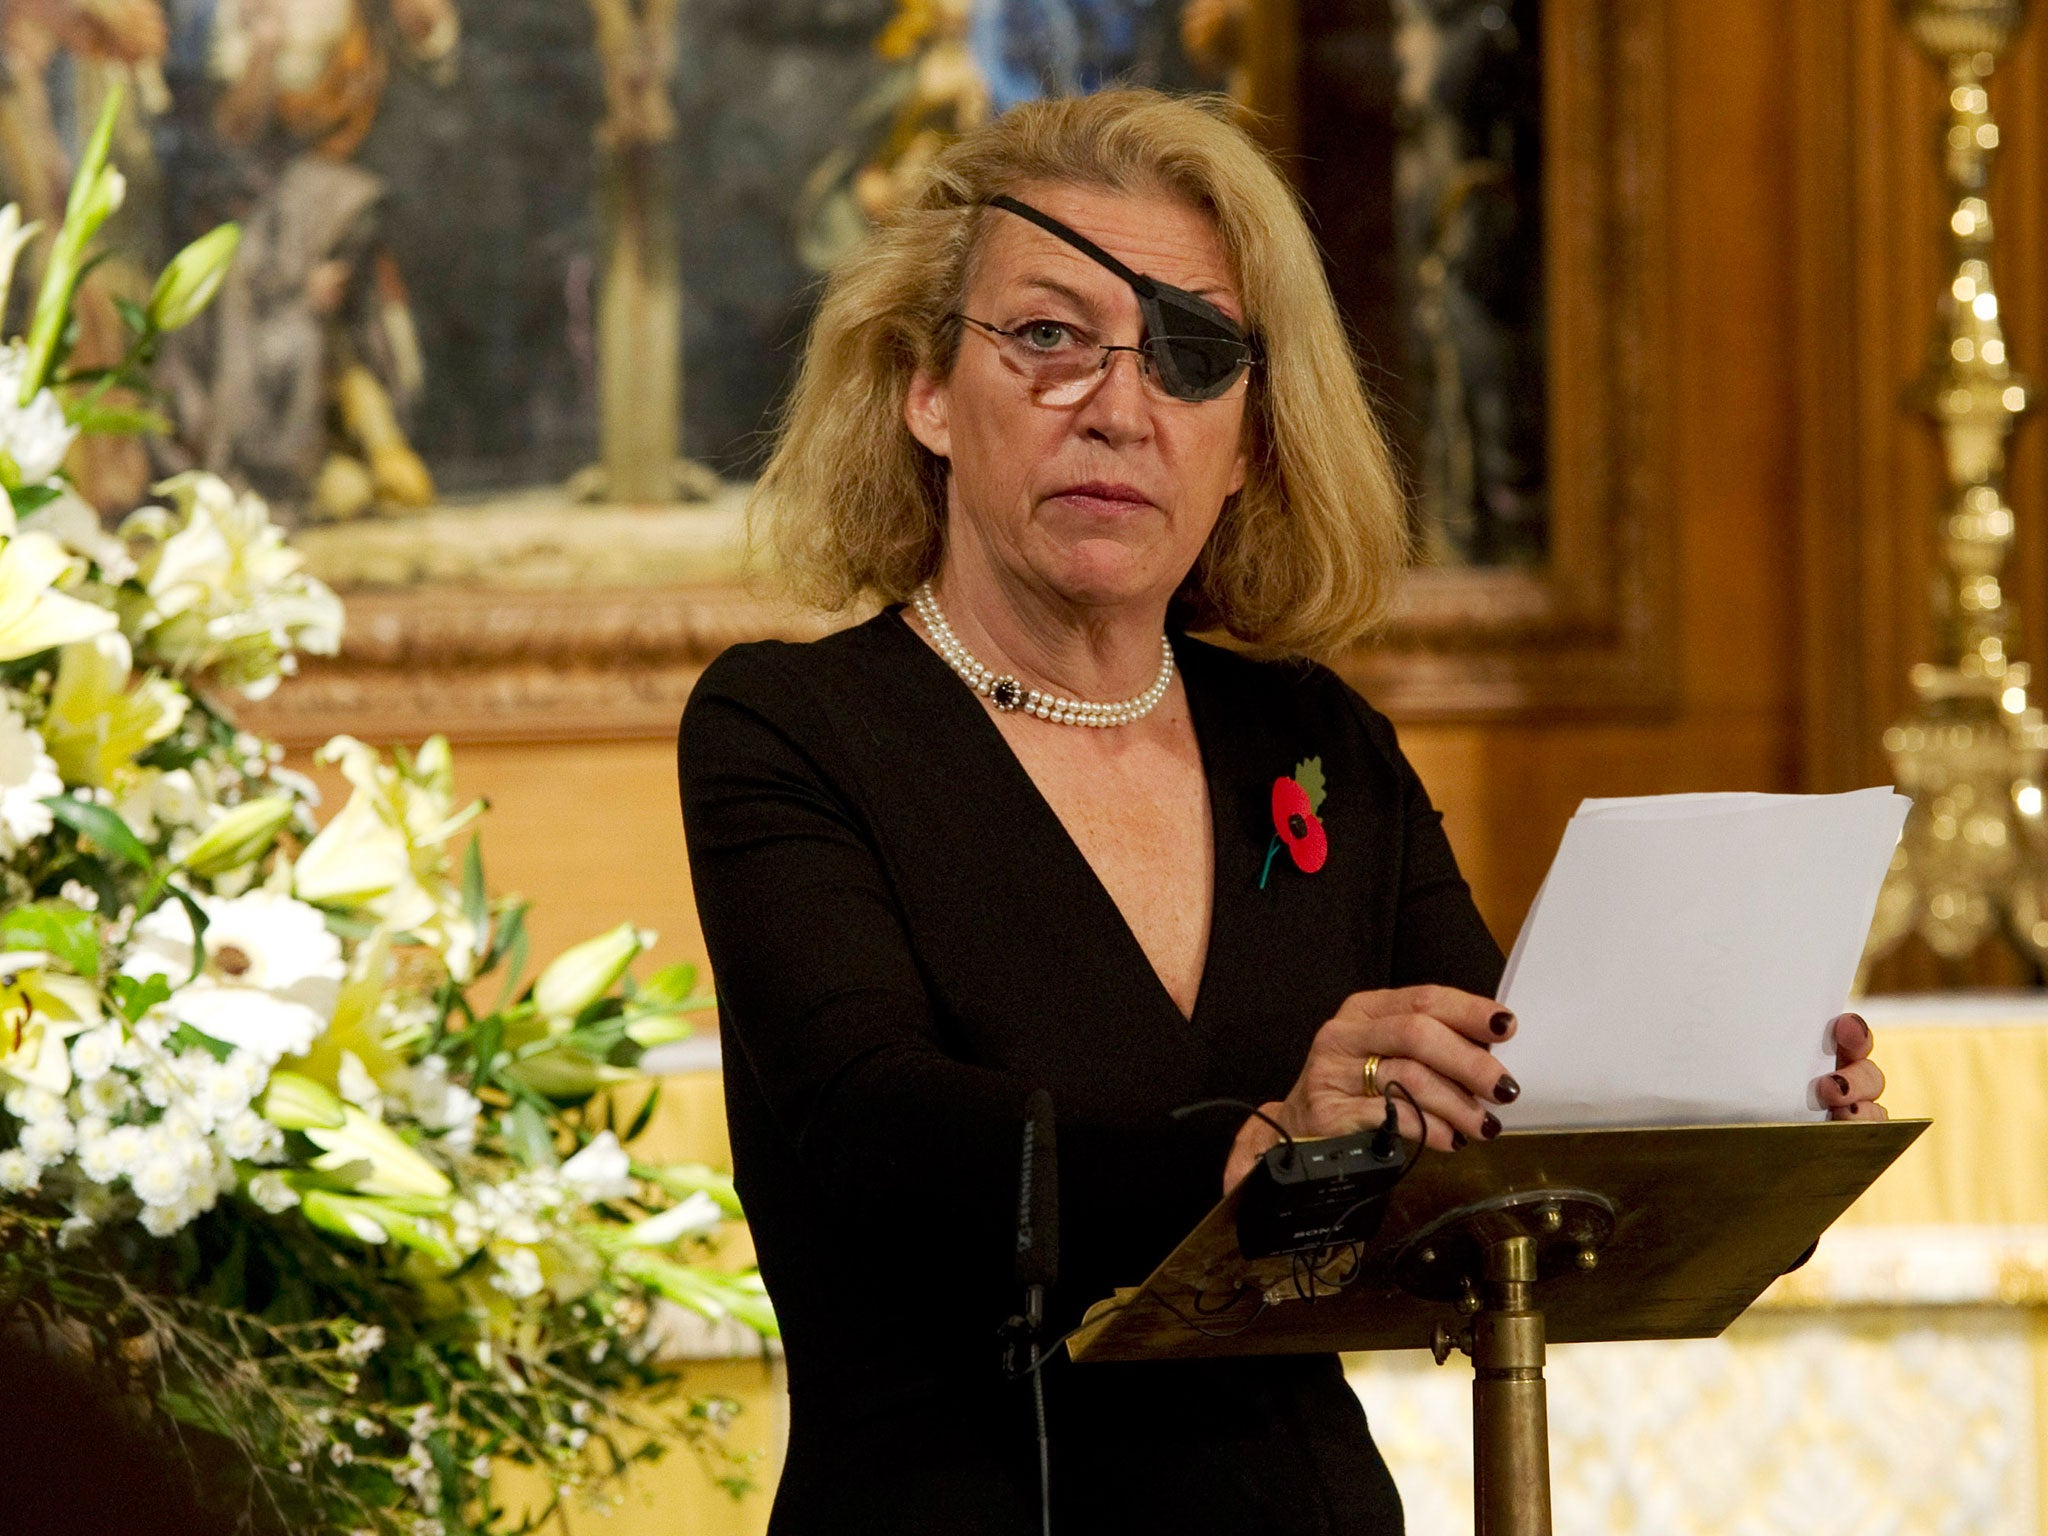 Marie Colvin of The Sunday Times, gives the address during a service at St. Bride's church November 10, 2010 in London, England. The service commemorated journalists, cameramen and support staff who have fallen in the war zones and conflicts in the 21st century